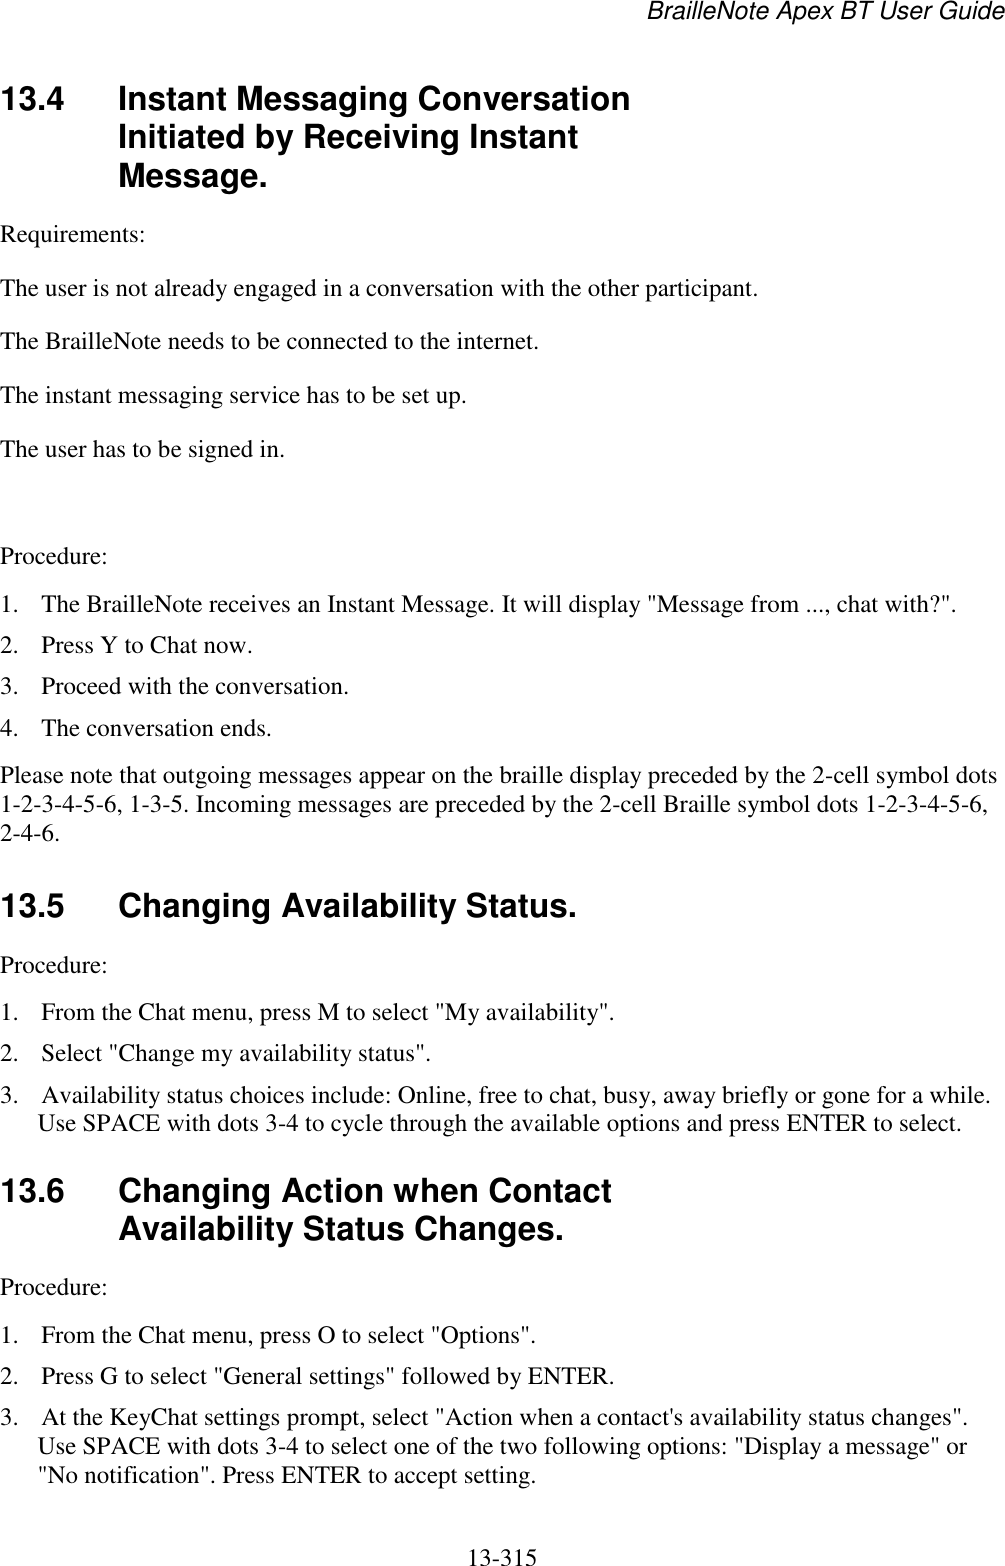 BrailleNote Apex BT User Guide   13-315   13.4  Instant Messaging Conversation Initiated by Receiving Instant Message. Requirements:  The user is not already engaged in a conversation with the other participant.  The BrailleNote needs to be connected to the internet.  The instant messaging service has to be set up. The user has to be signed in.   Procedure:  1. The BrailleNote receives an Instant Message. It will display &quot;Message from ..., chat with?&quot;. 2. Press Y to Chat now. 3. Proceed with the conversation. 4. The conversation ends. Please note that outgoing messages appear on the braille display preceded by the 2-cell symbol dots 1-2-3-4-5-6, 1-3-5. Incoming messages are preceded by the 2-cell Braille symbol dots 1-2-3-4-5-6, 2-4-6.  13.5  Changing Availability Status. Procedure: 1. From the Chat menu, press M to select &quot;My availability&quot;.  2. Select &quot;Change my availability status&quot;.  3. Availability status choices include: Online, free to chat, busy, away briefly or gone for a while. Use SPACE with dots 3-4 to cycle through the available options and press ENTER to select.   13.6  Changing Action when Contact Availability Status Changes. Procedure:  1. From the Chat menu, press O to select &quot;Options&quot;.  2. Press G to select &quot;General settings&quot; followed by ENTER.  3. At the KeyChat settings prompt, select &quot;Action when a contact&apos;s availability status changes&quot;. Use SPACE with dots 3-4 to select one of the two following options: &quot;Display a message&quot; or &quot;No notification&quot;. Press ENTER to accept setting.   